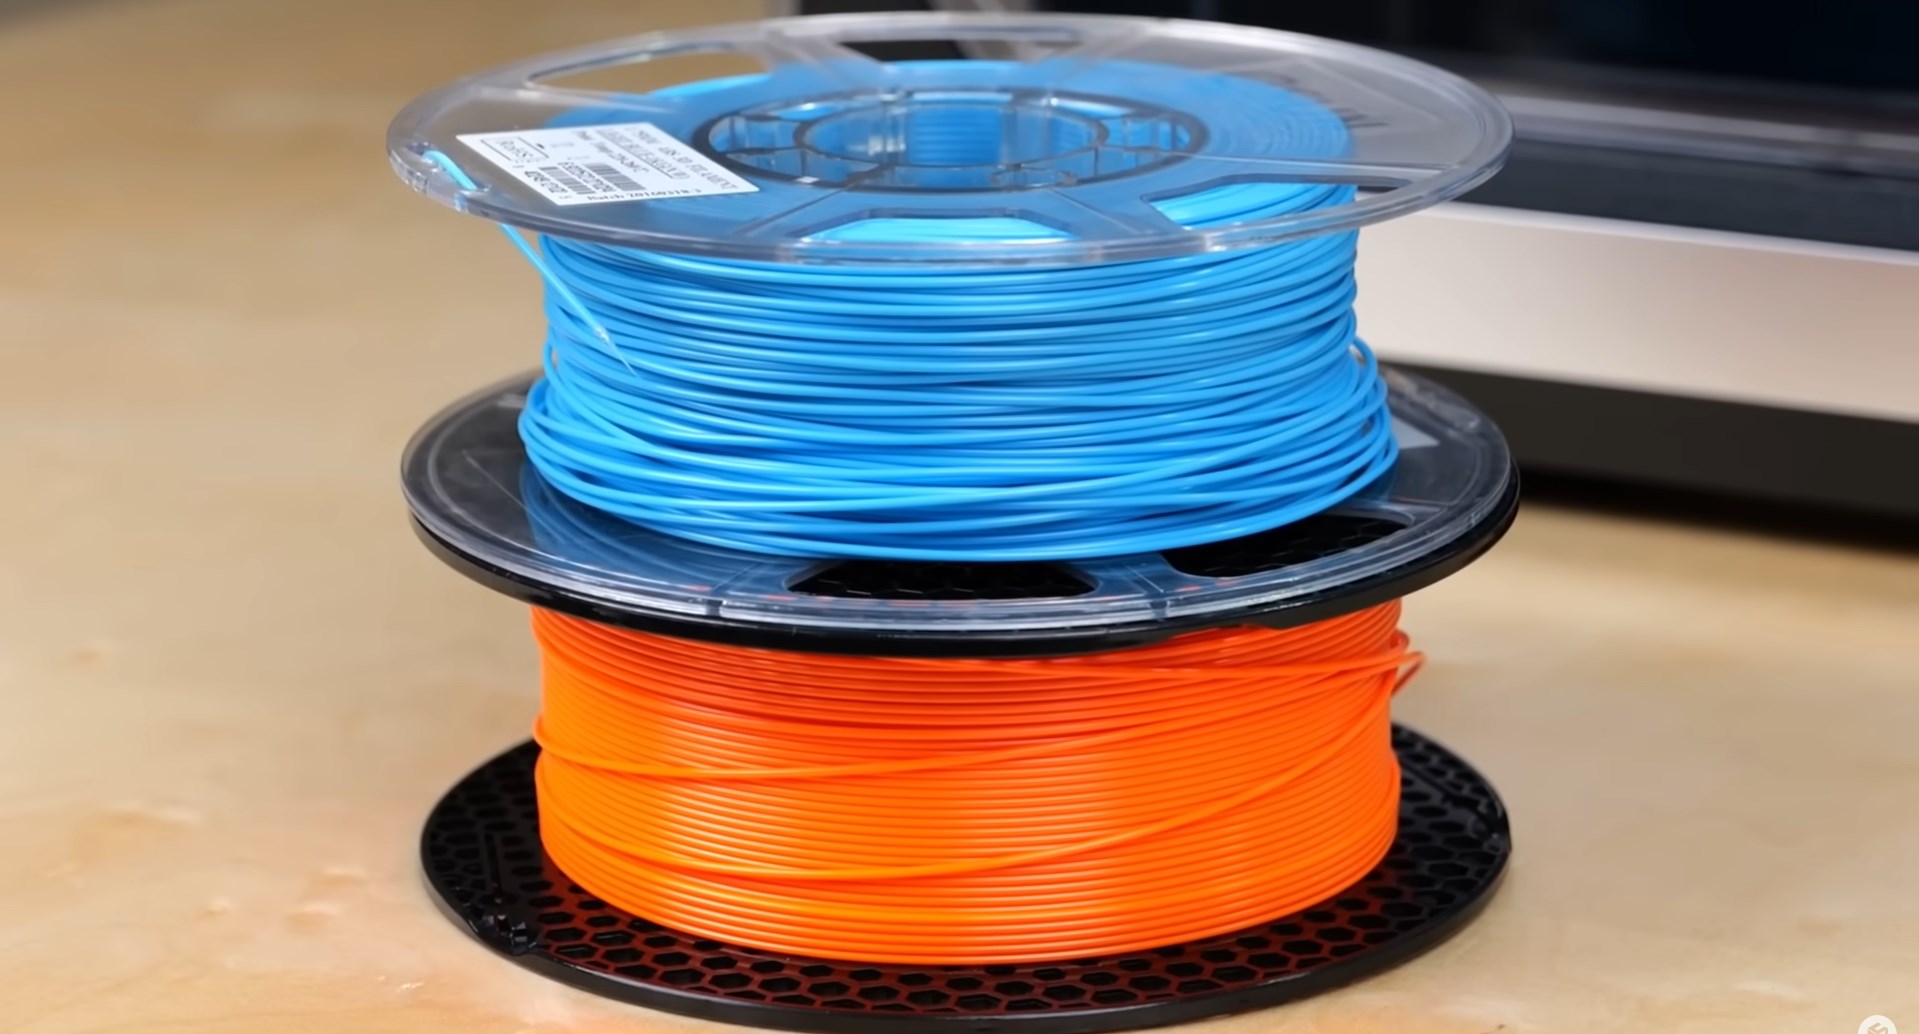 How Much Does 3D Printing Filament Cost